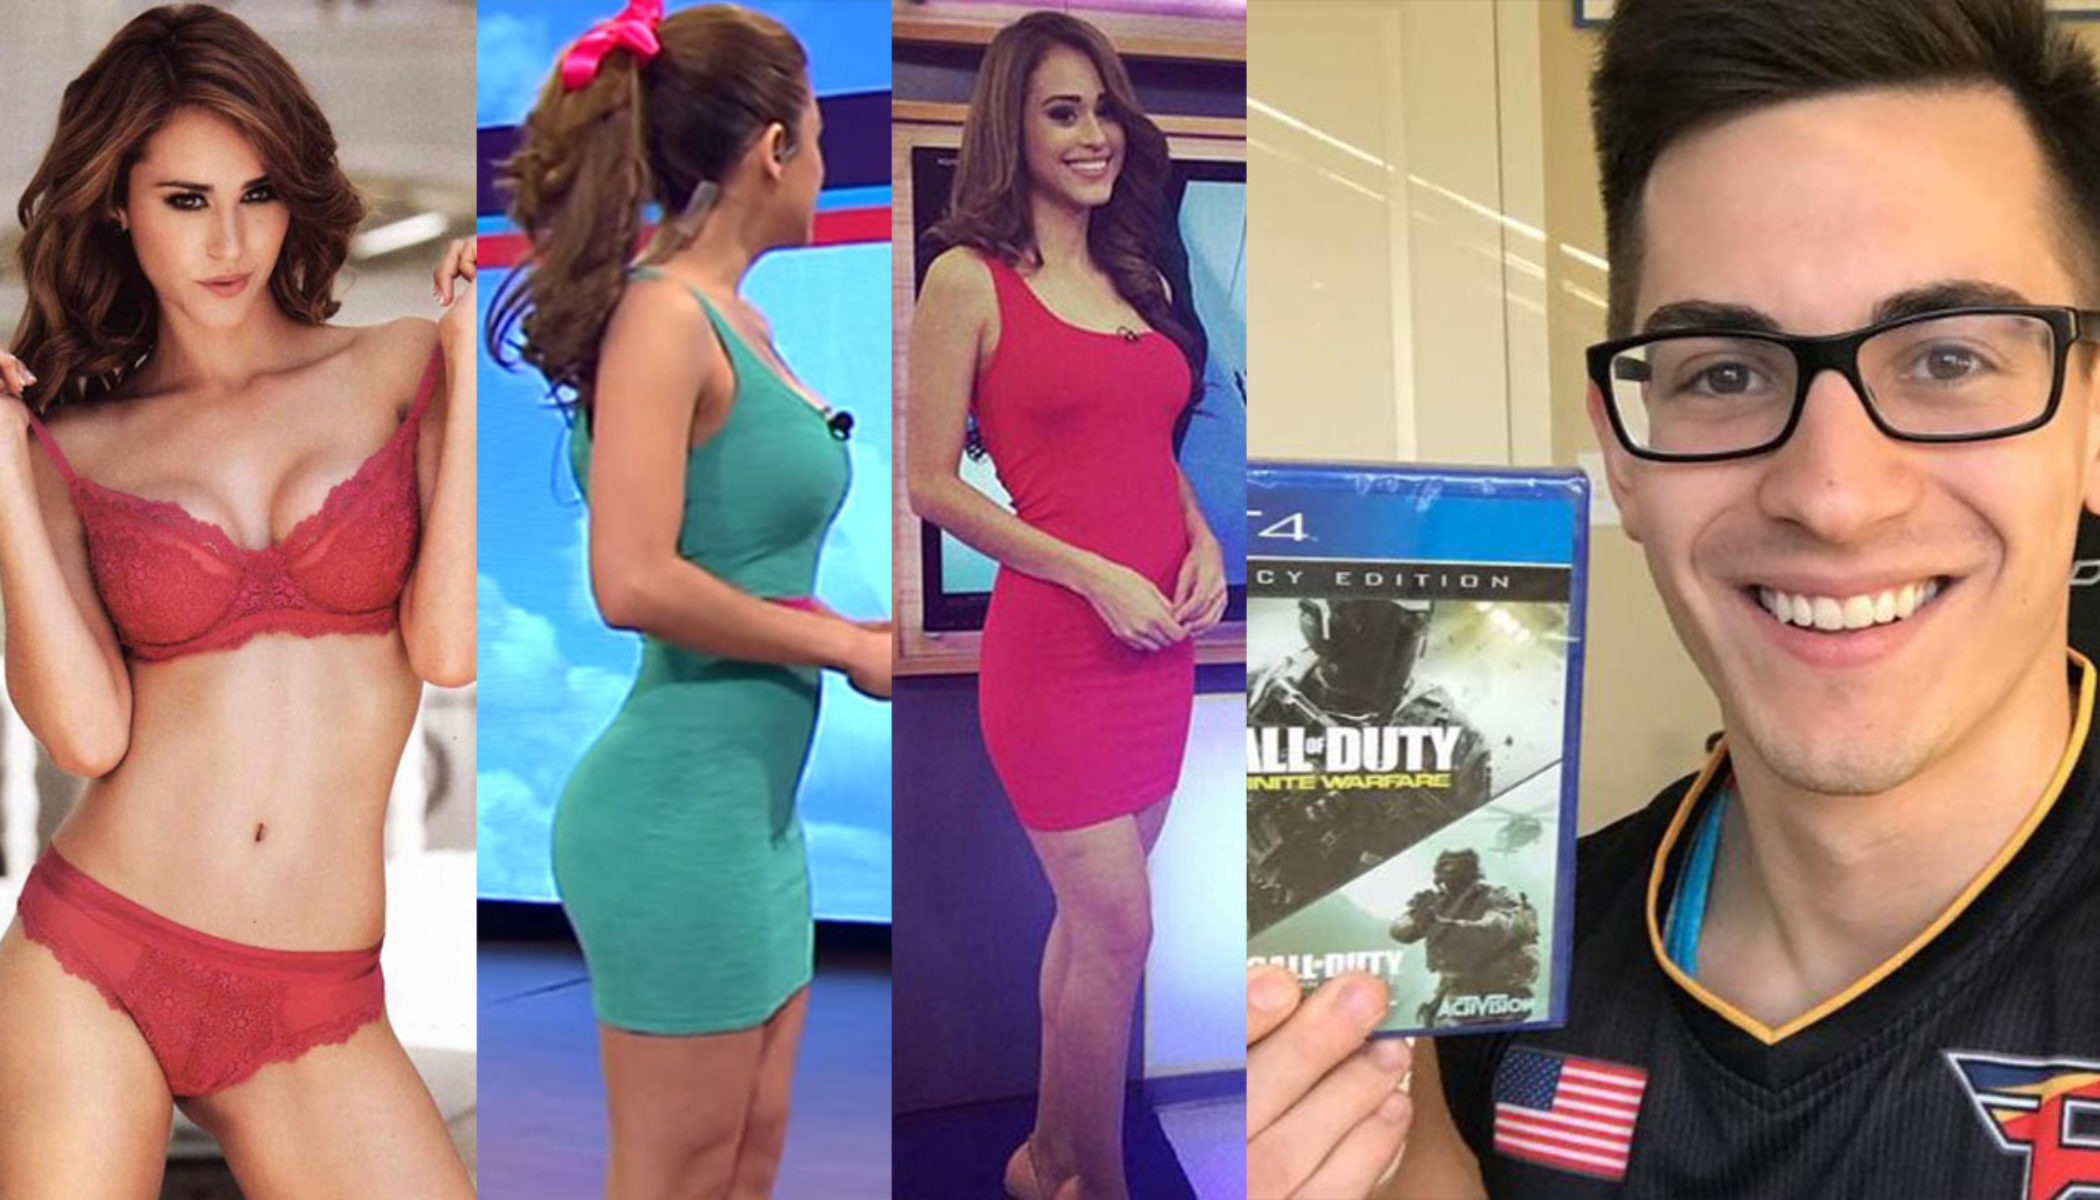 The mexican weather girl